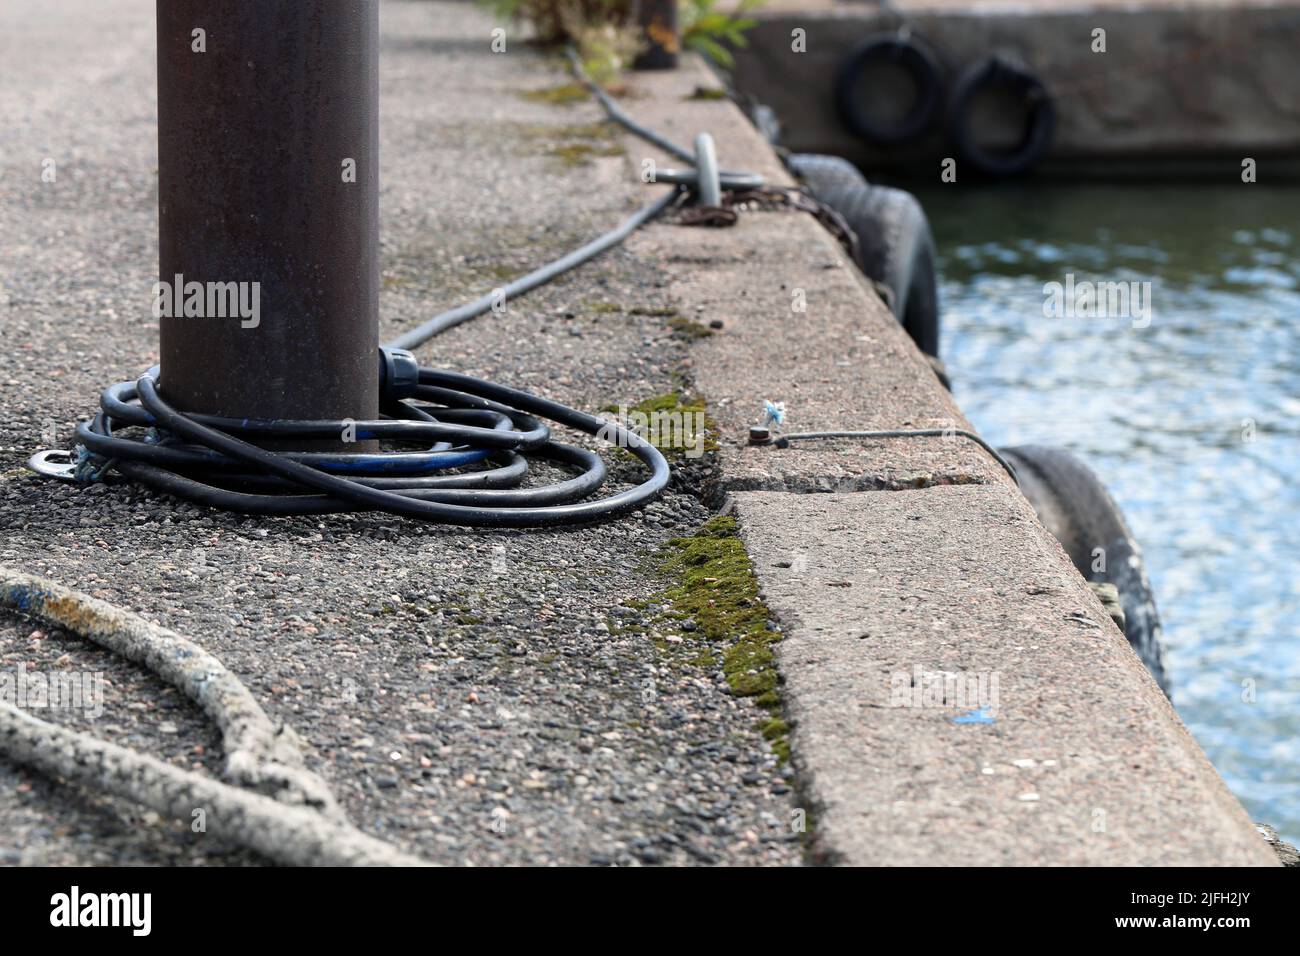 Small harbor architecture details in Helsinki, Finland, June 2019. Old rusty metal pole to which you can chain a boat. Also some concrete floor. Stock Photo